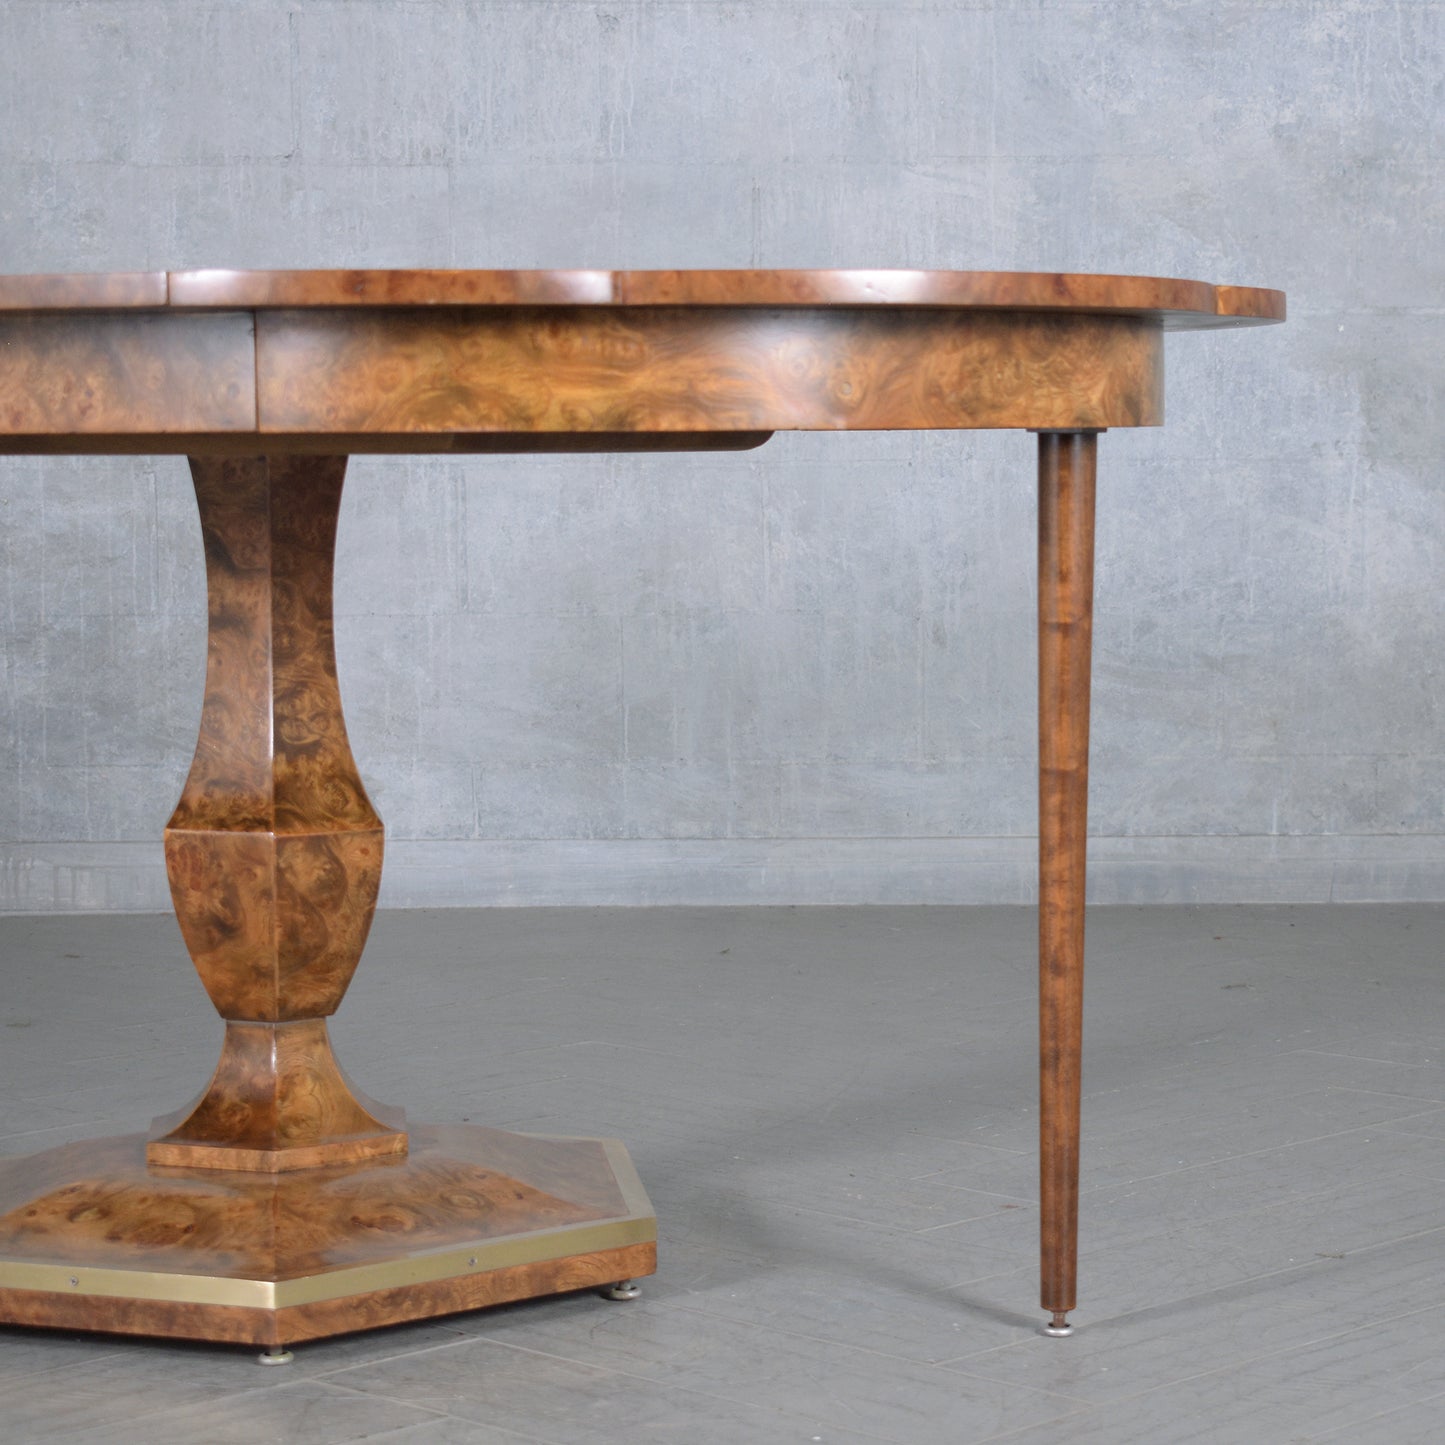 Vintage 1960s Walnut Burl Extendable Dining Table - Expertly Crafted & Restored